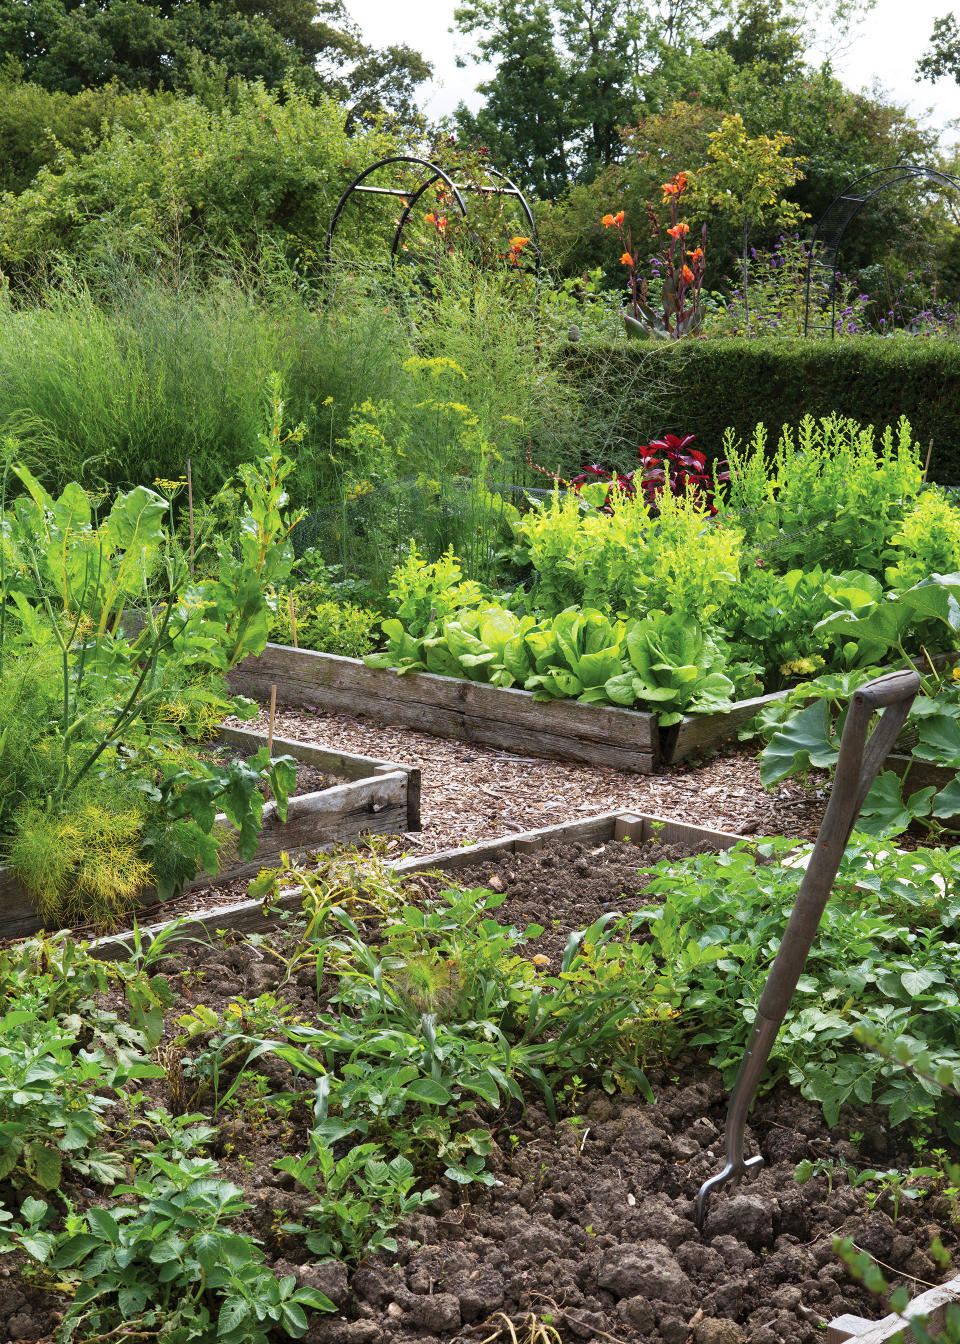 5. Customize your soil to match your plants' needs